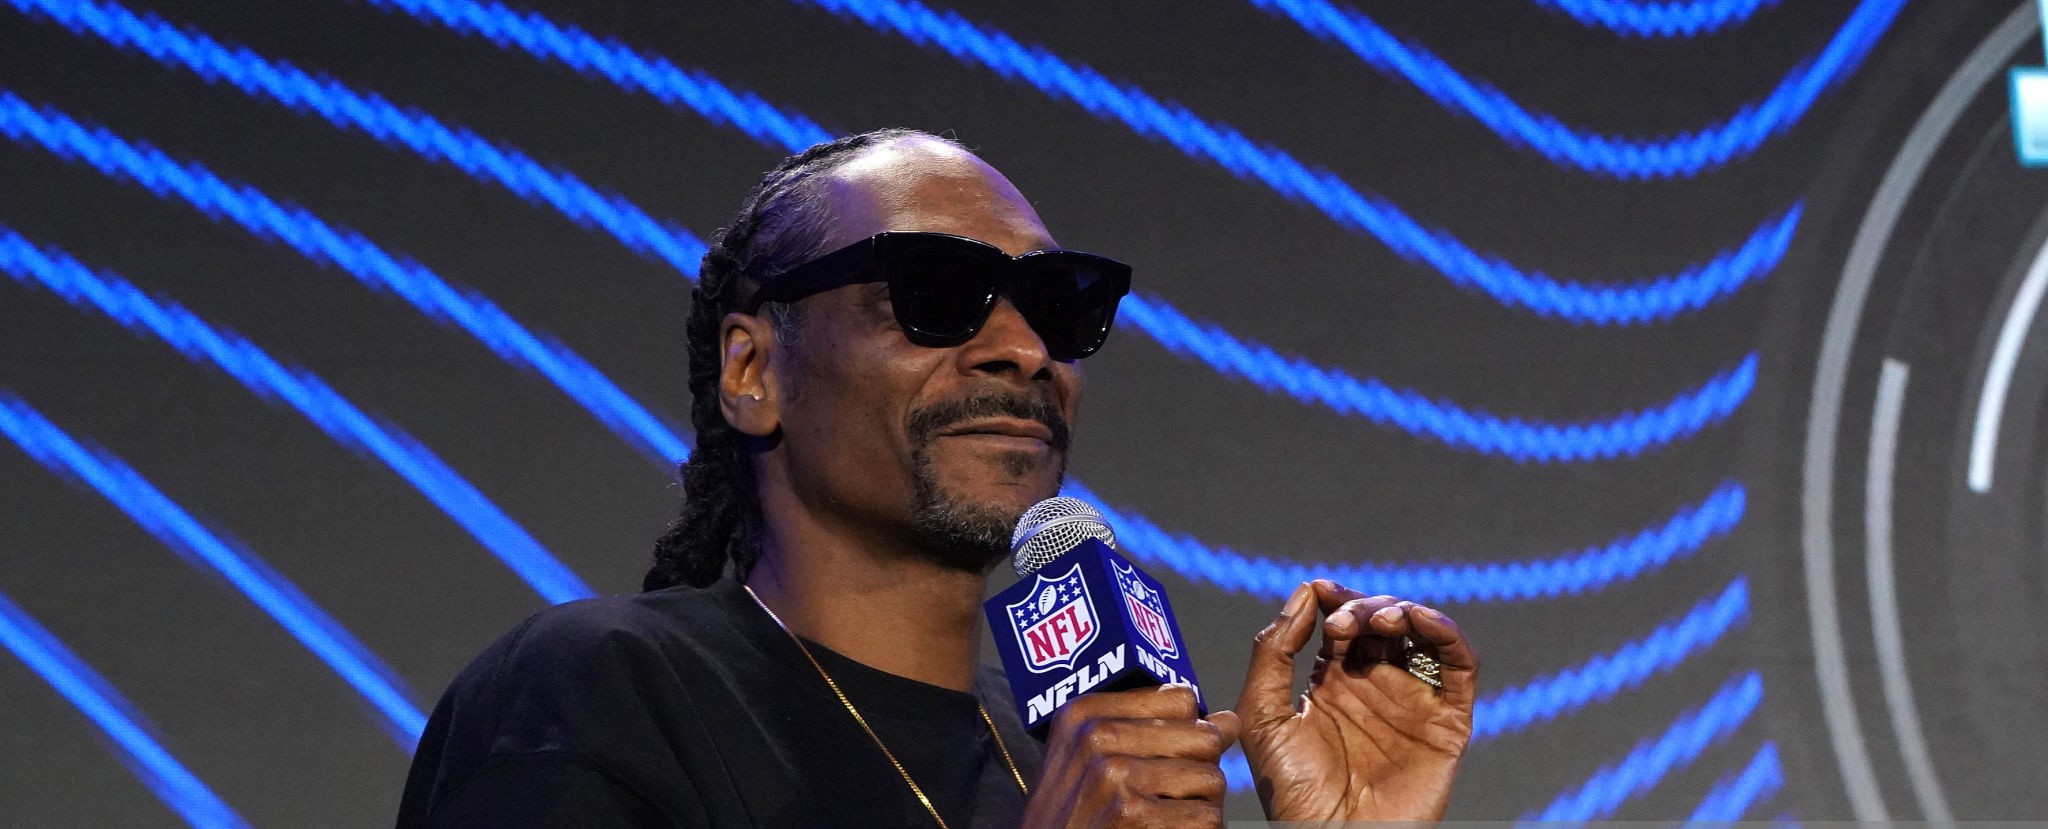 Snoop Dogg’s Net Worth In 2022 After Death